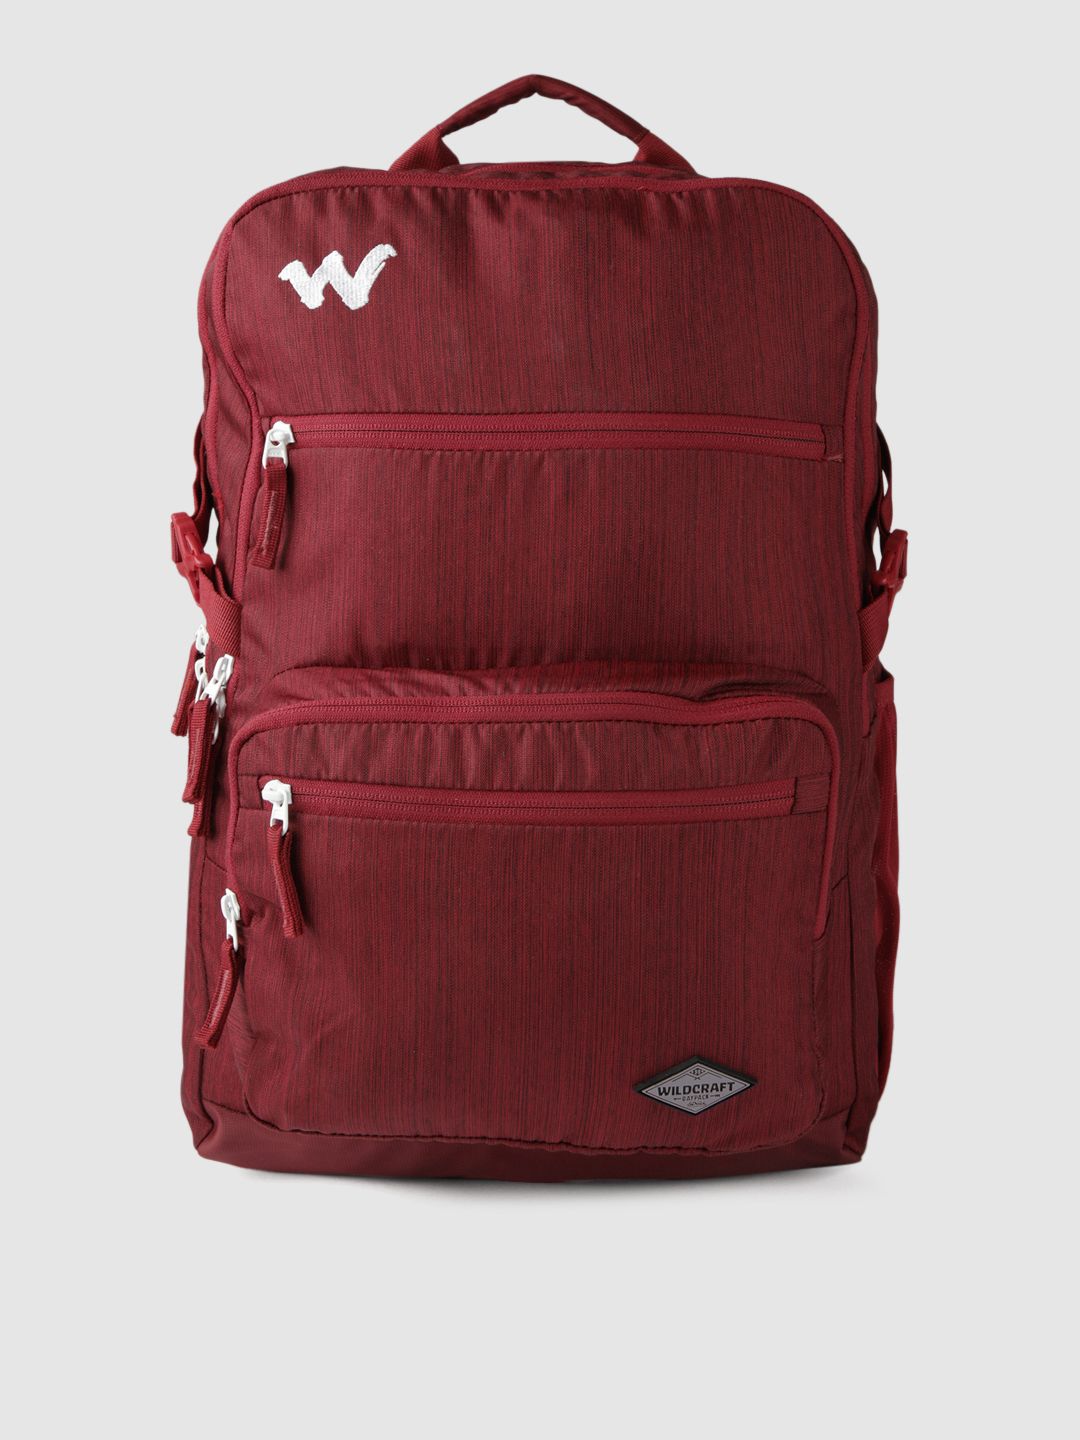 Wildcraft Unisex Red Solid Evo3 Mel Backpack Price in India